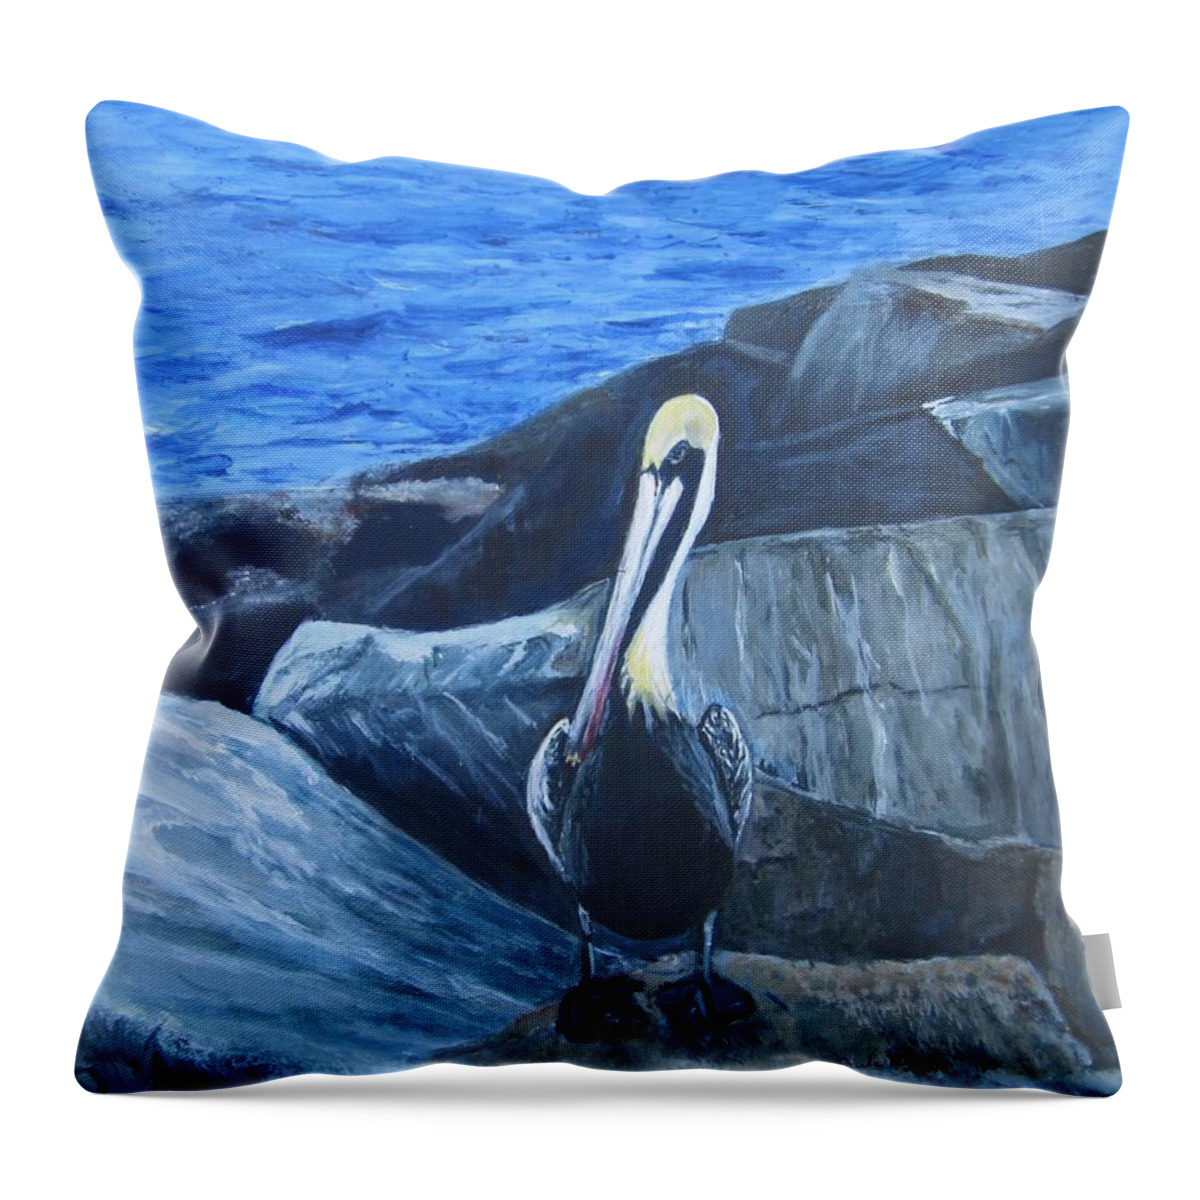 Pelican Throw Pillow featuring the painting Pelican On The Rocks by Paula Pagliughi